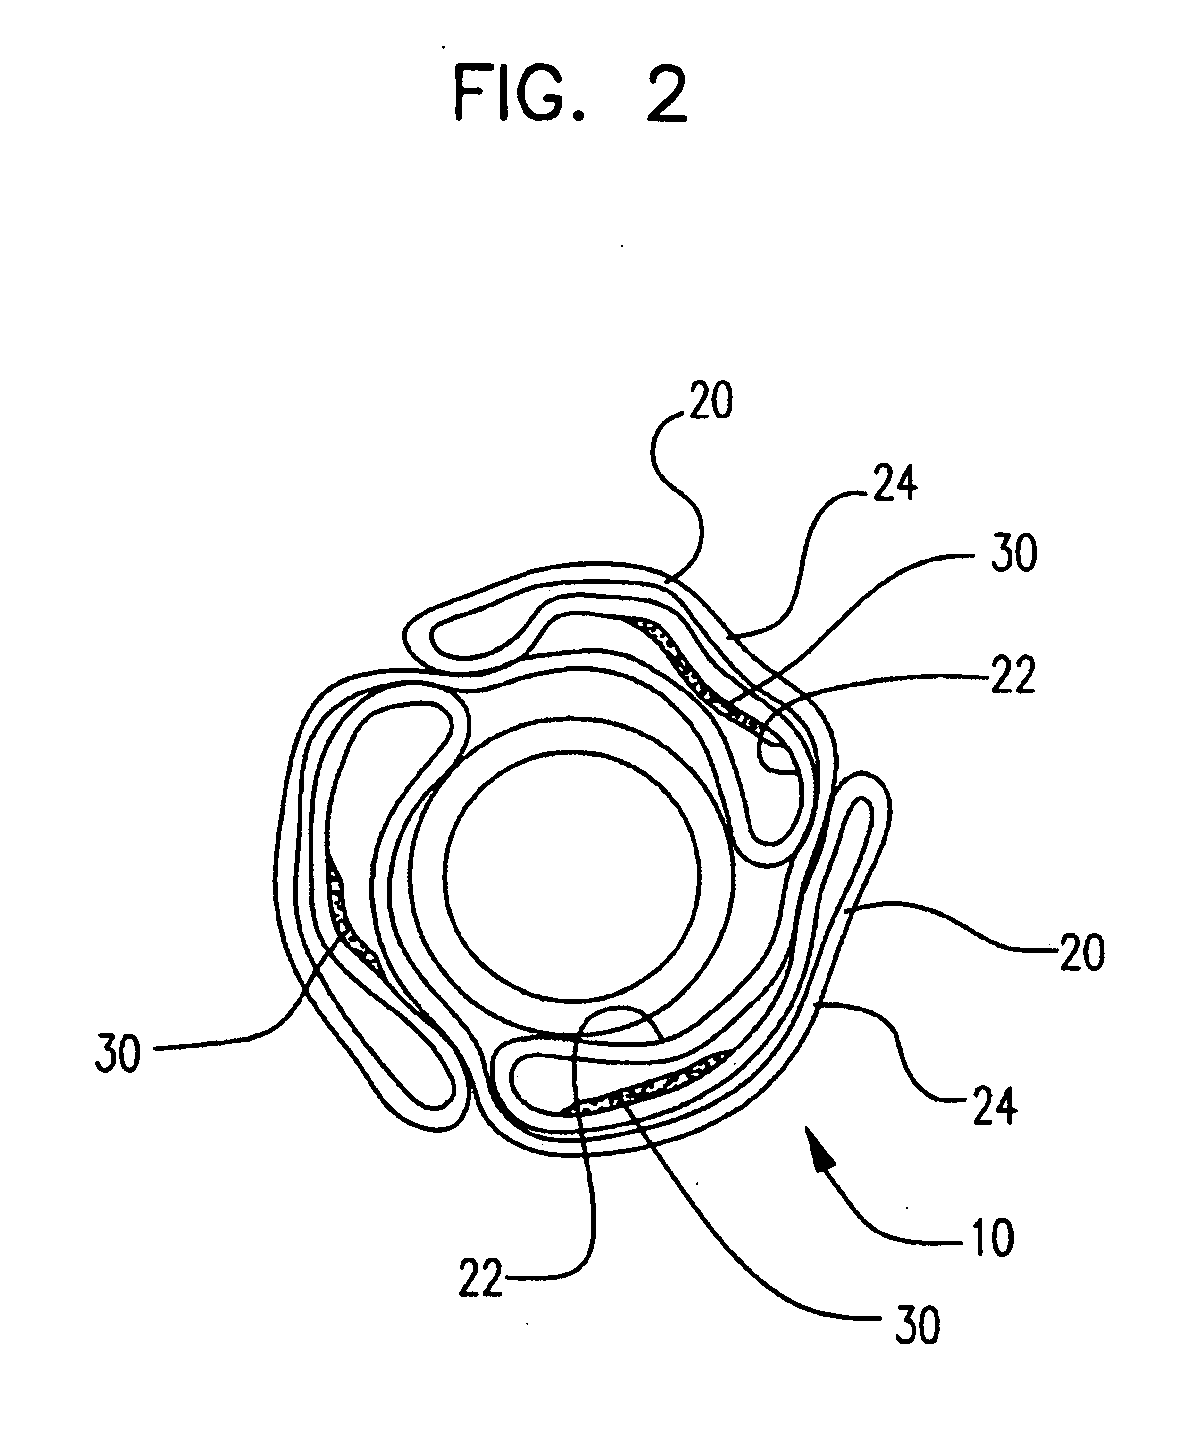 Selectively coated medical balloons